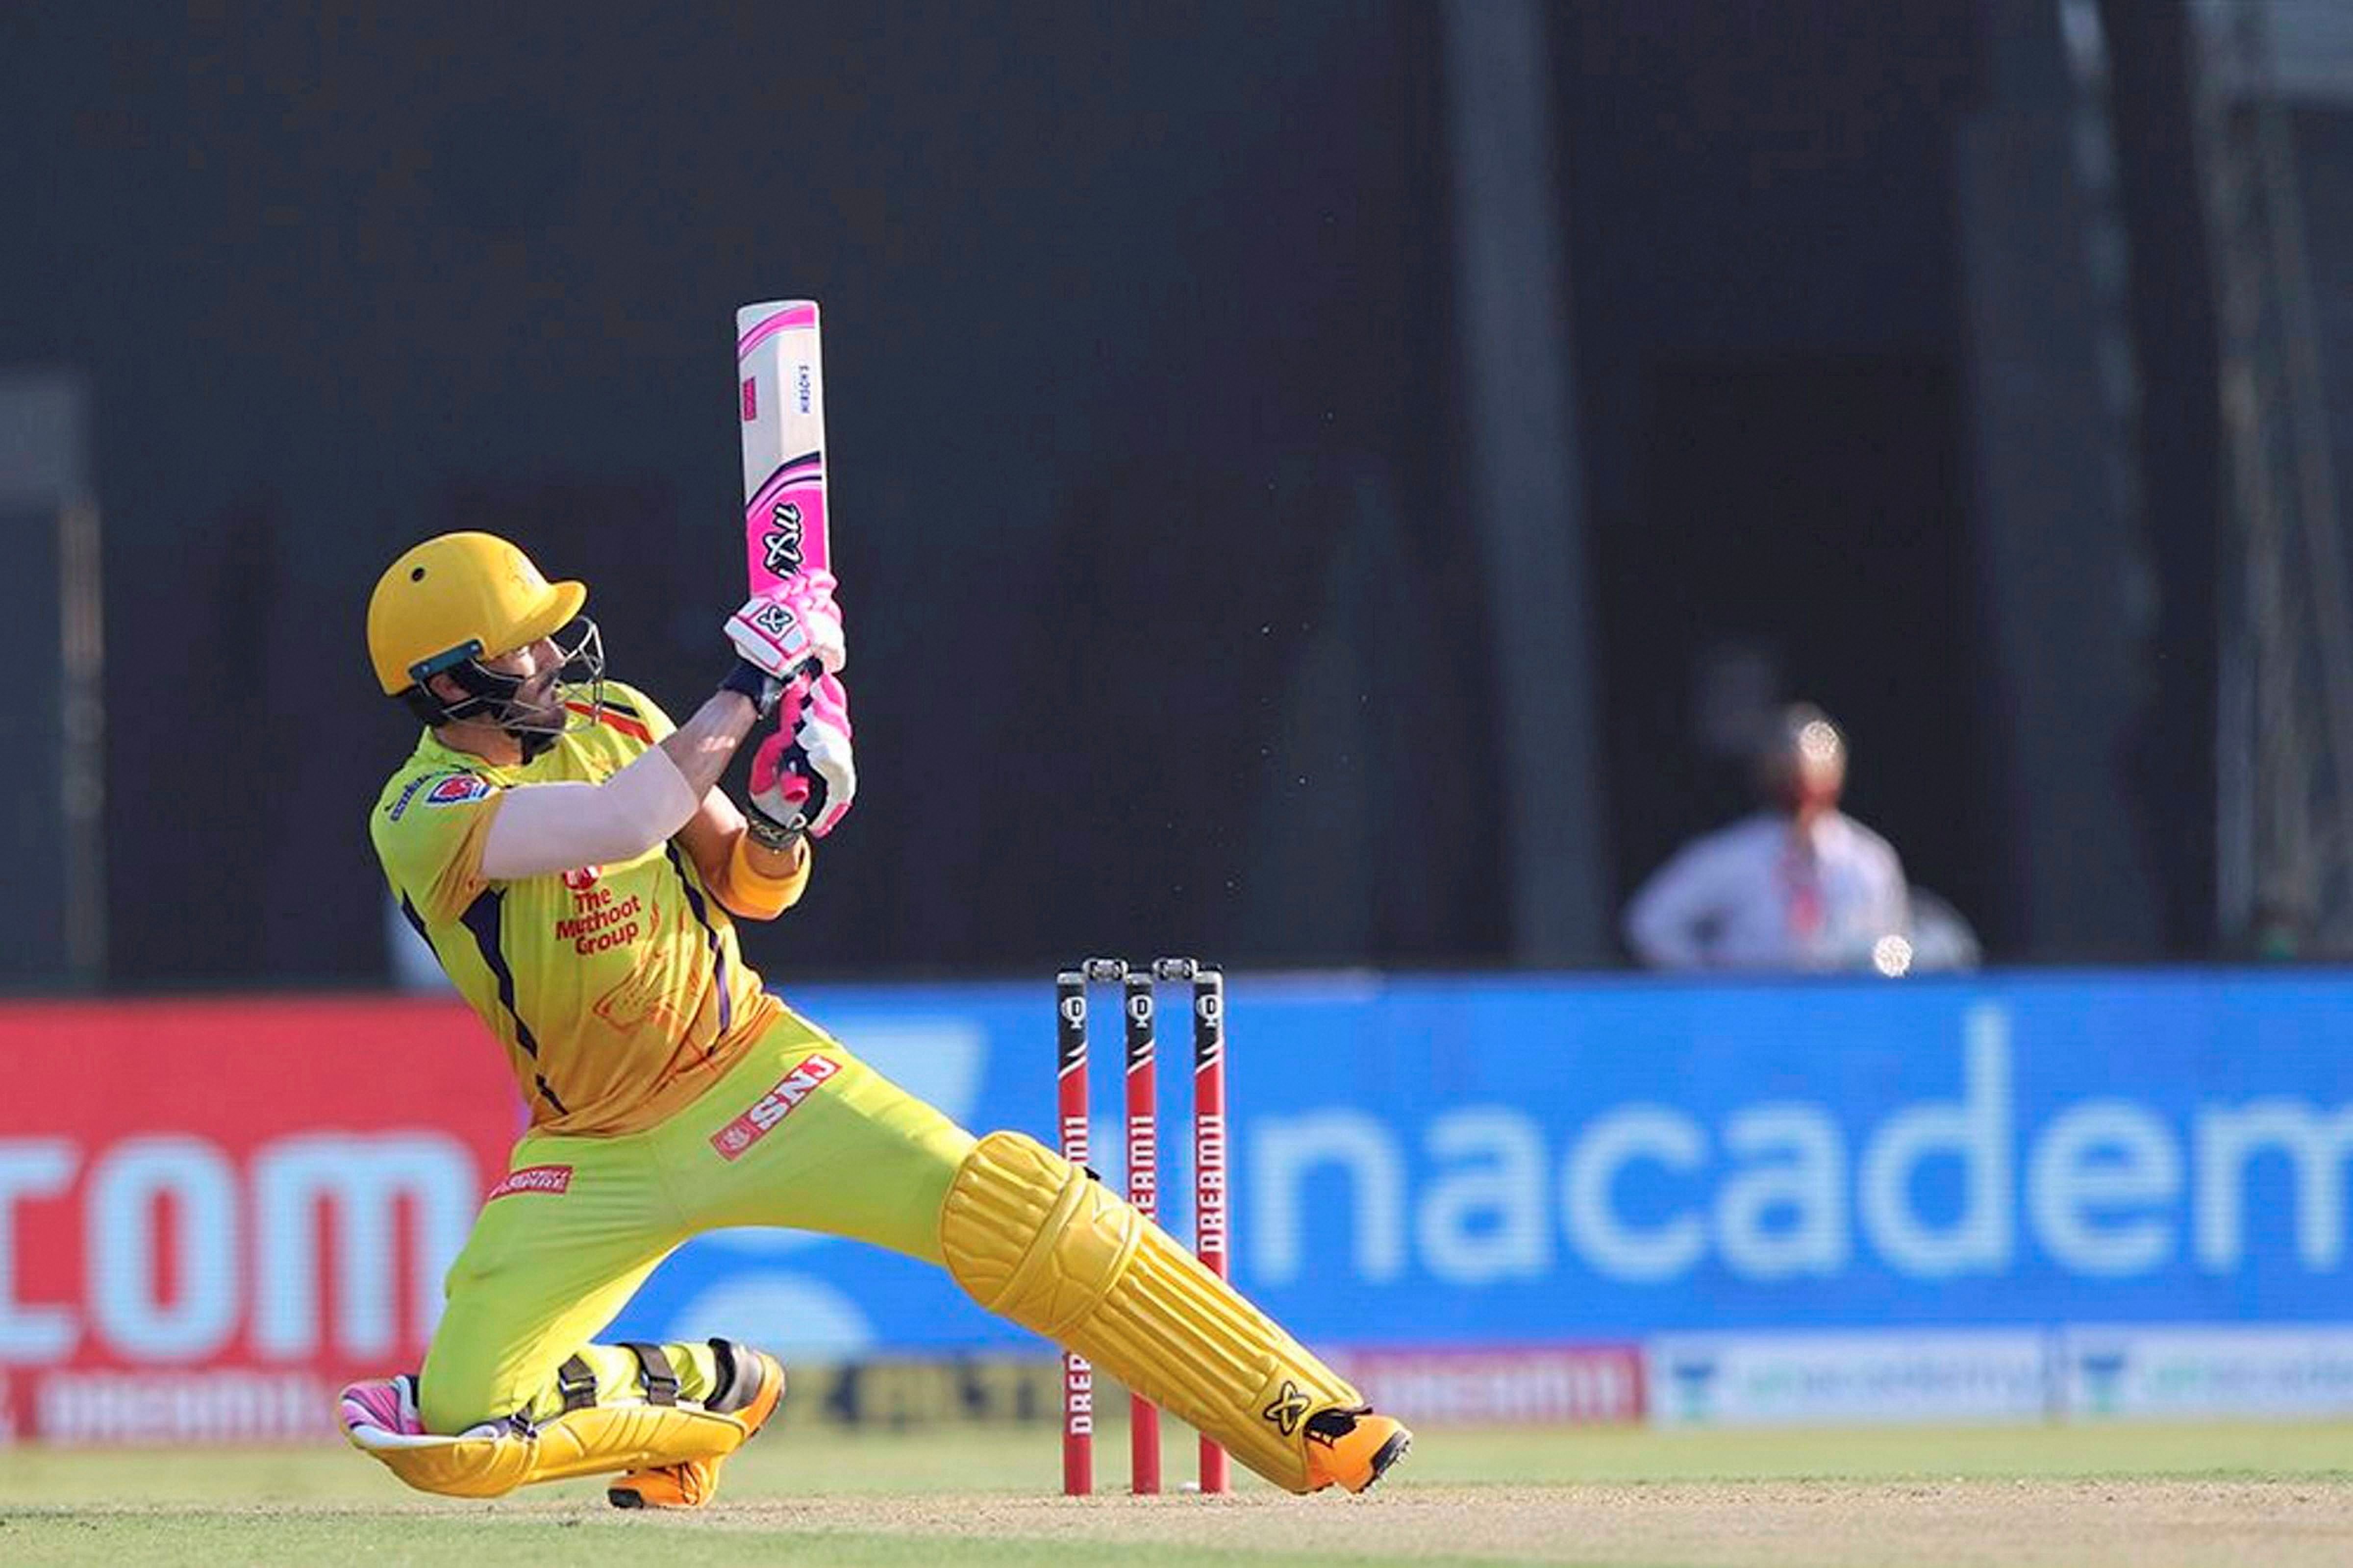 Faf du Plessis of the Chennai Super Kings plays a shot during an IPL 2020 match in the UAE. Credit: PTI Photo